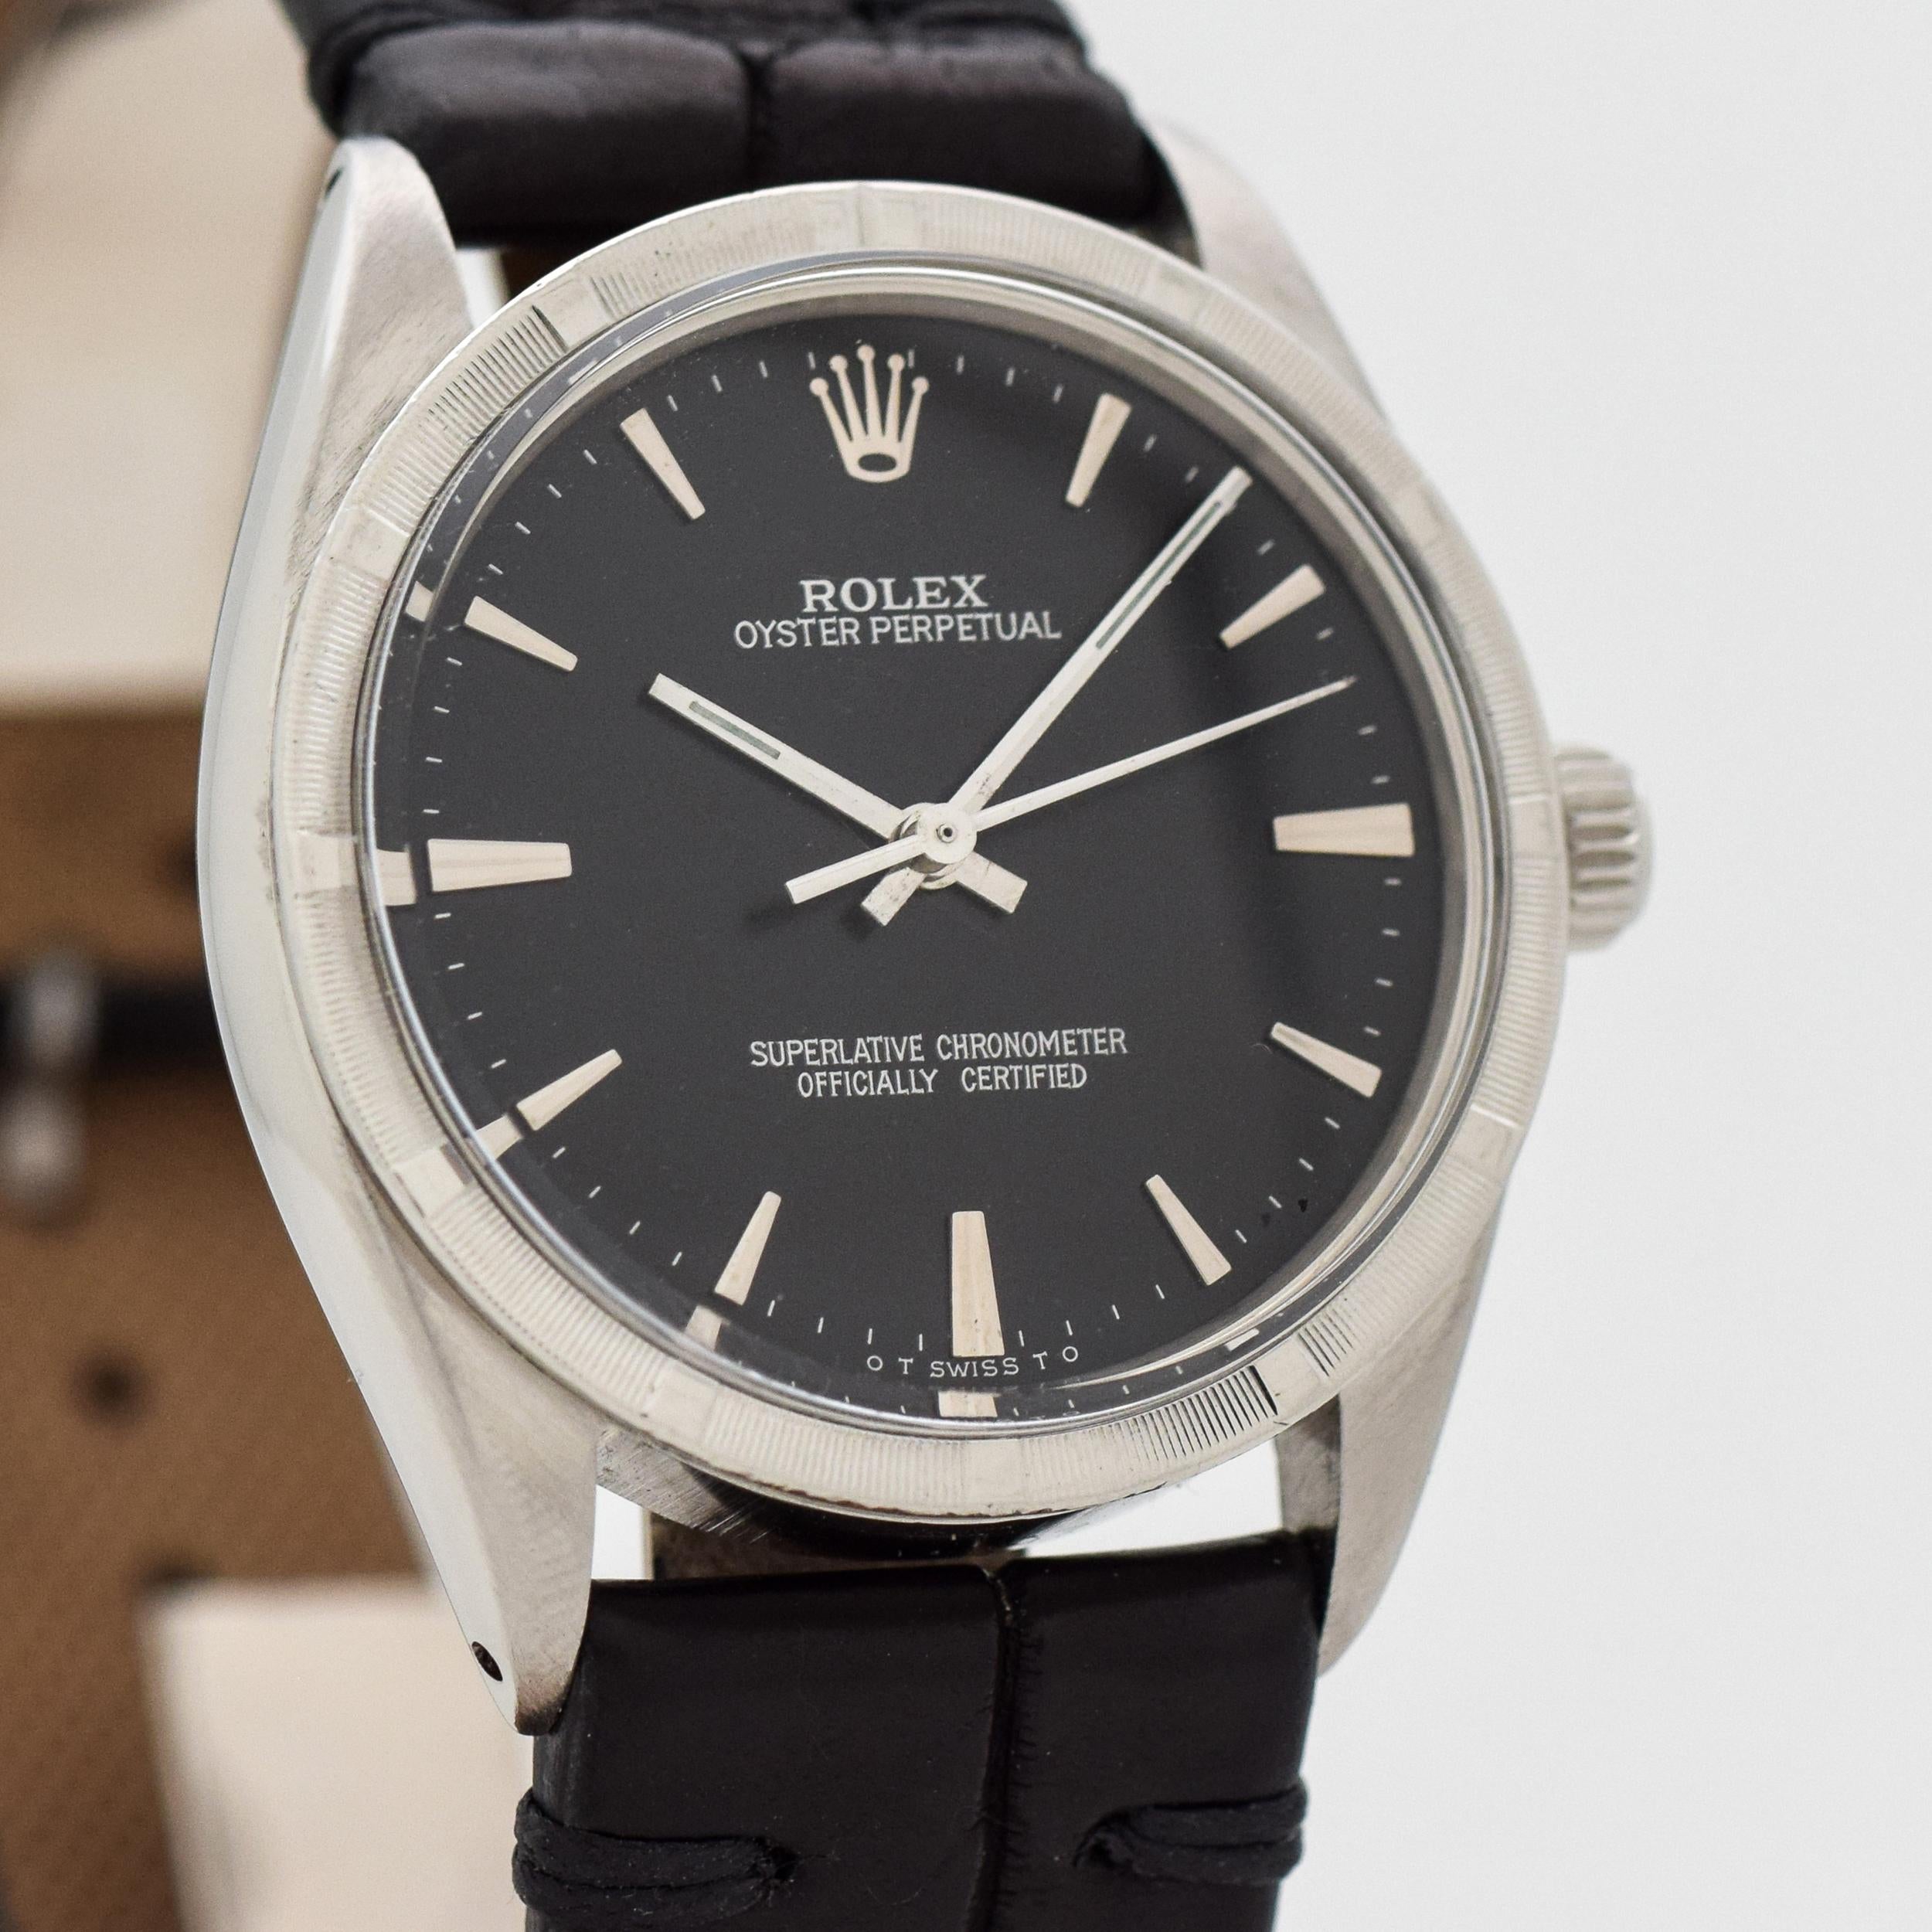 1966 Vintage Rolex Oyster Perpetual Automatic Ref. 1007 Stainless Steel watch with Machined Bezel with Original Black Sigma Dial with Applied 14k White Gold Beveled Tapered Stick/Bar/Baton Markers. 34mm x 38mm lug to lug (1.34 in. x 1.5 in.) - 26